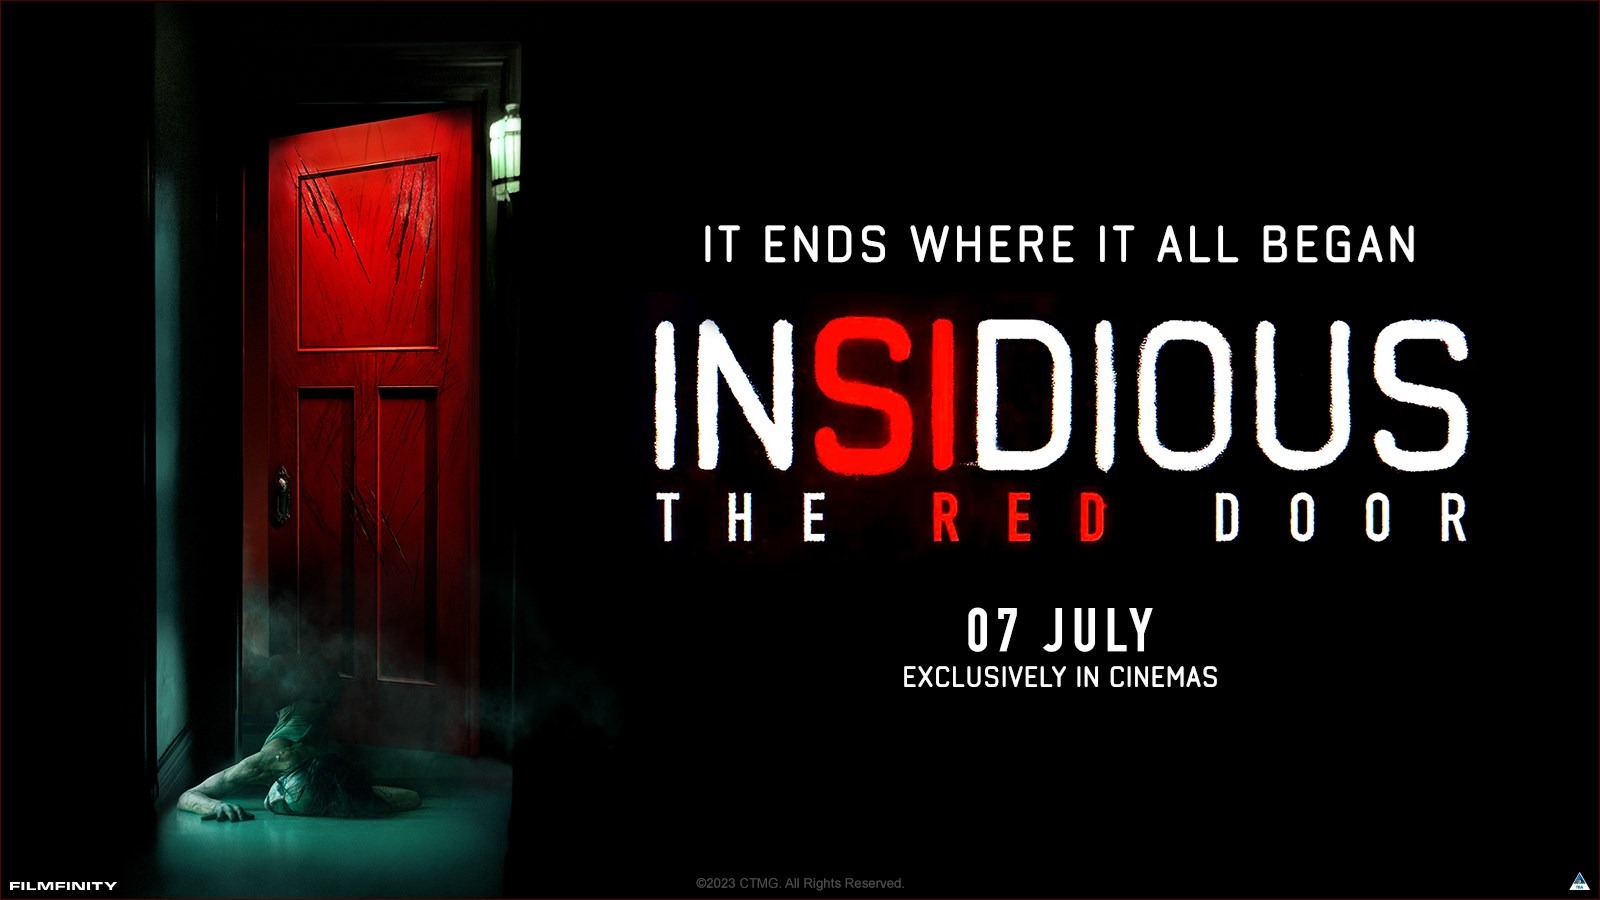 Review: “Insidious: The Red Door” – A Haunting Sequel